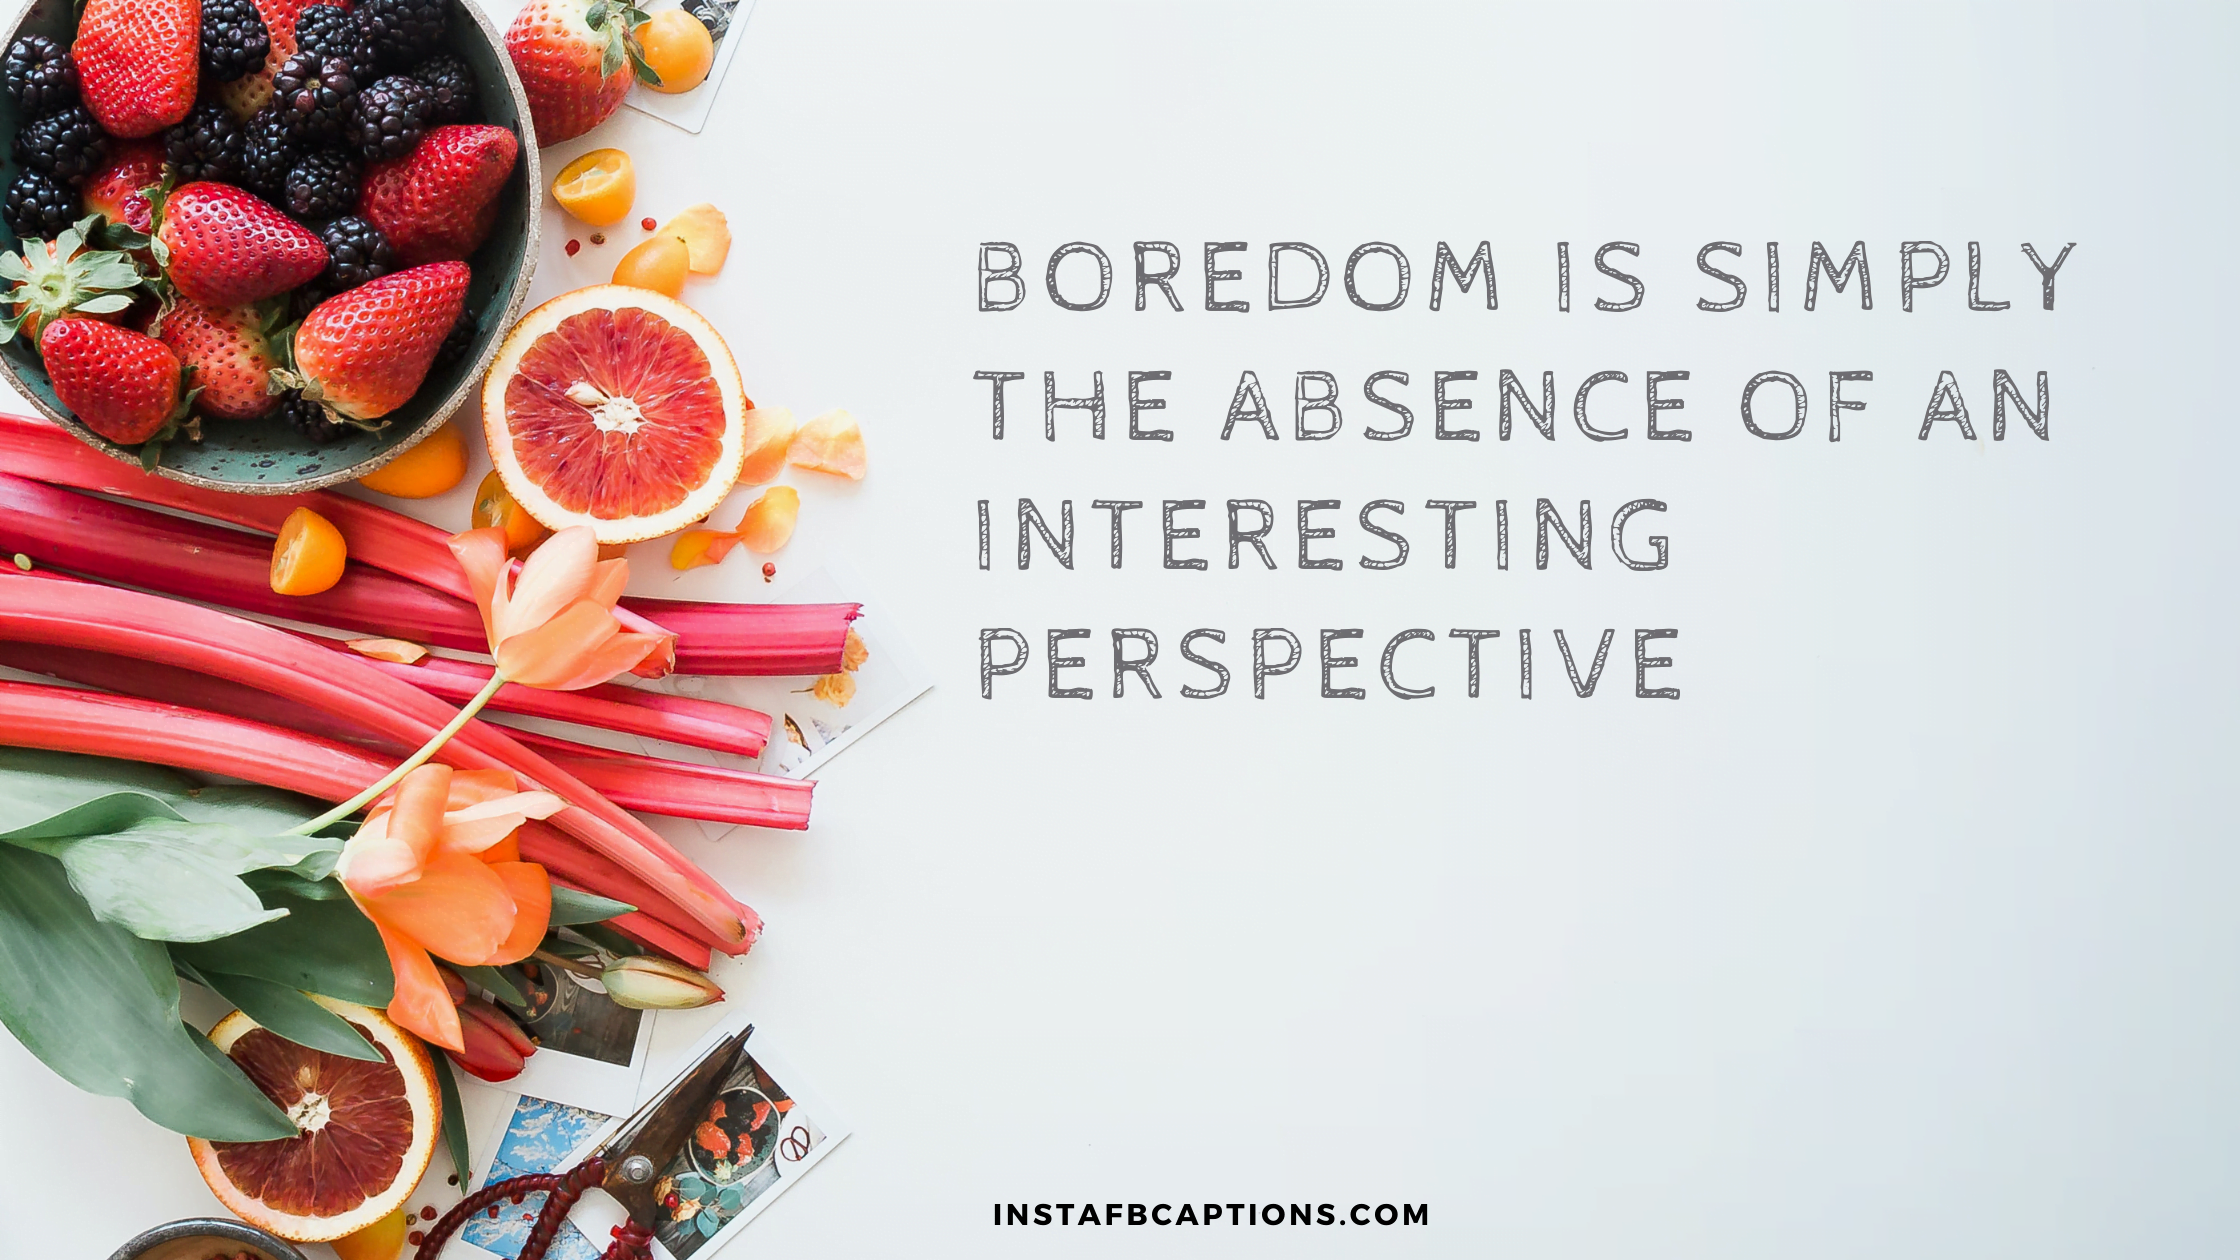 Interesting Quotes To Read When Getting Bored  - Interesting Quotes To Read When Getting Bored 1 - 87 Instagram Captions for Bored Photos in 2022